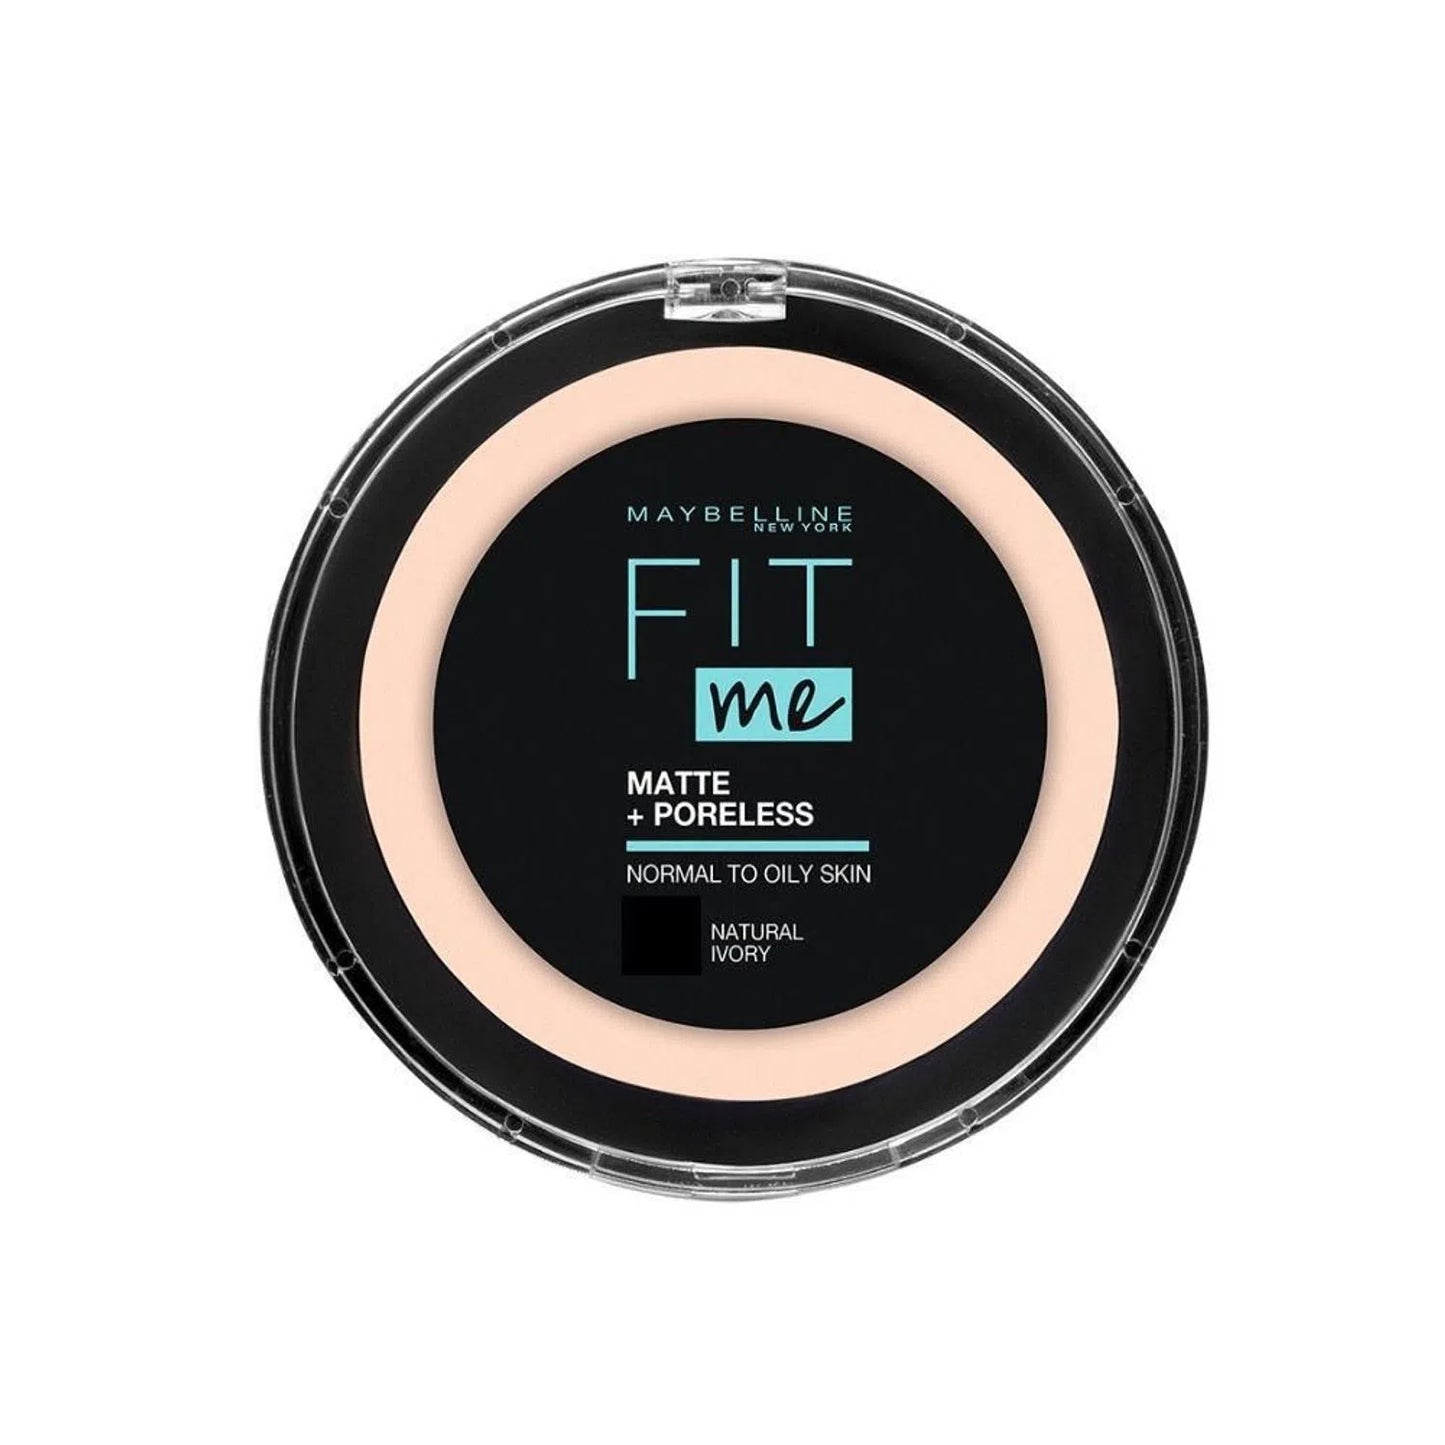 Polvo Compacto Matificante Fit Me 112 Nat Ivory Maybelline